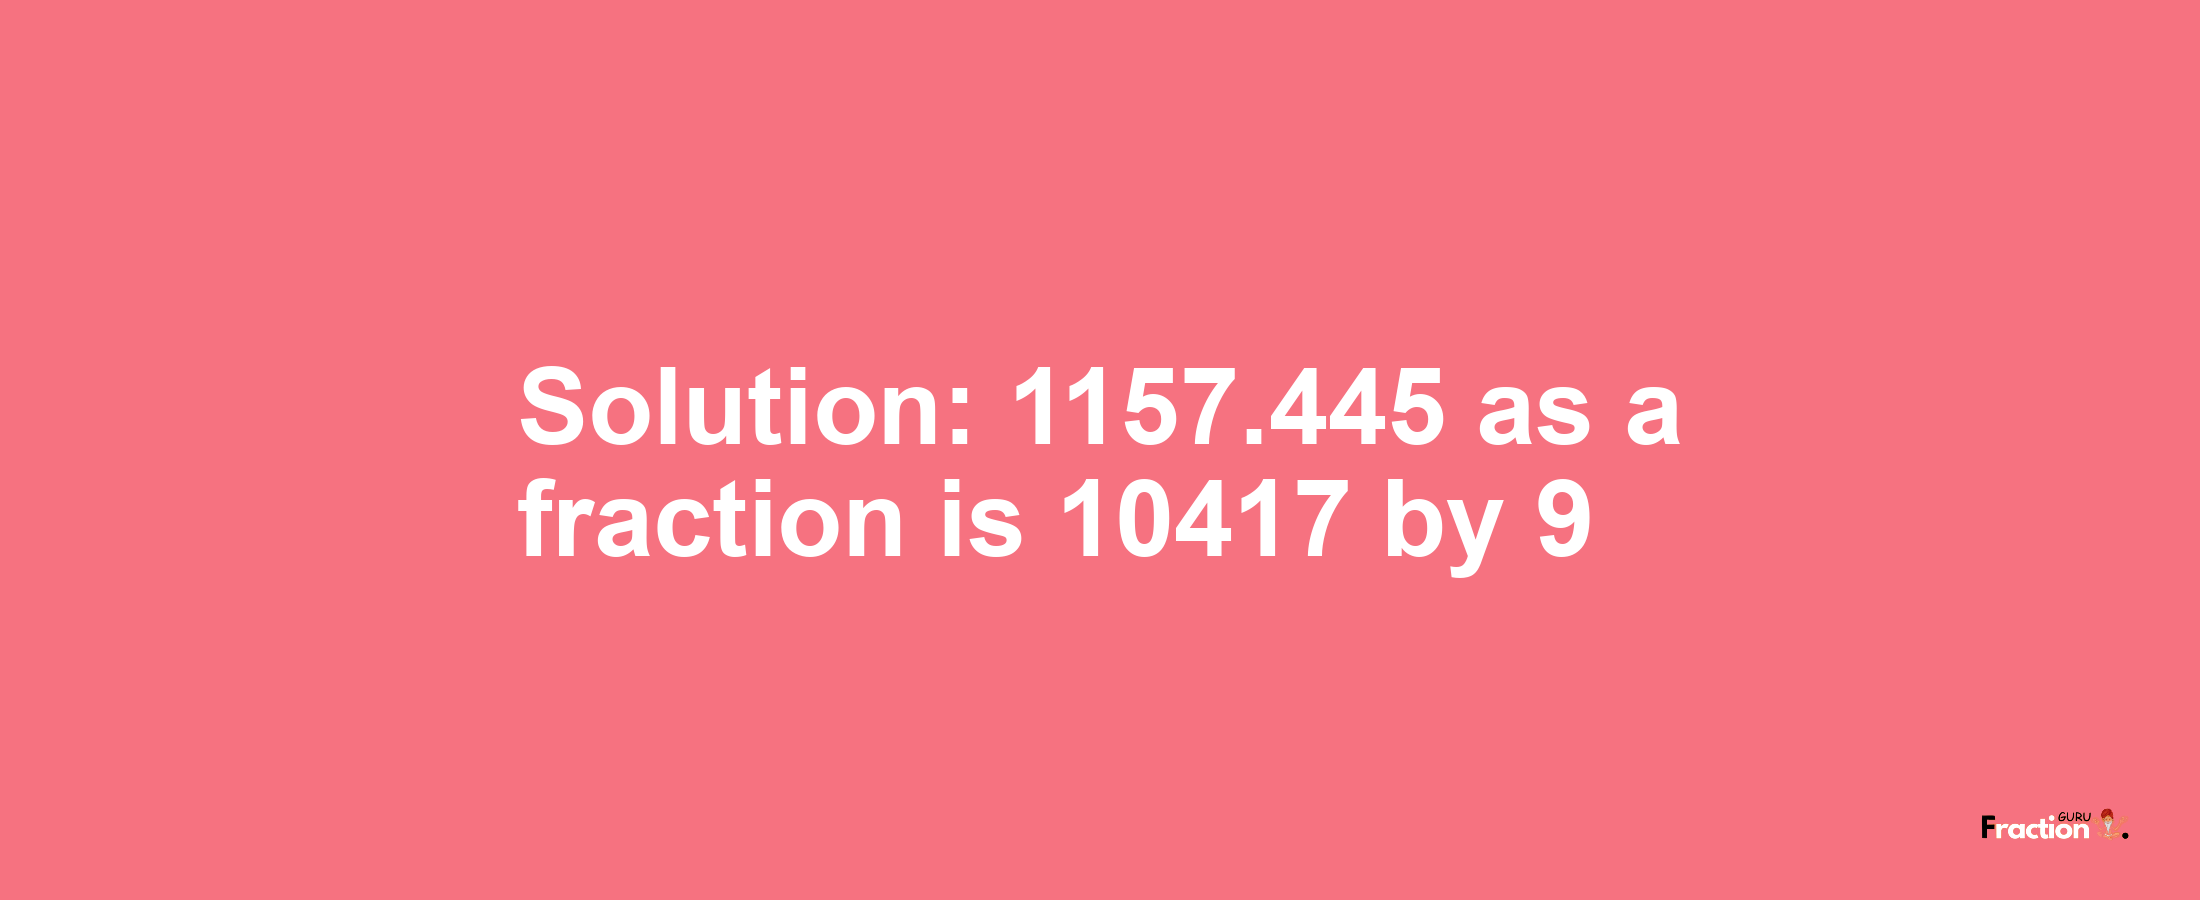 Solution:1157.445 as a fraction is 10417/9